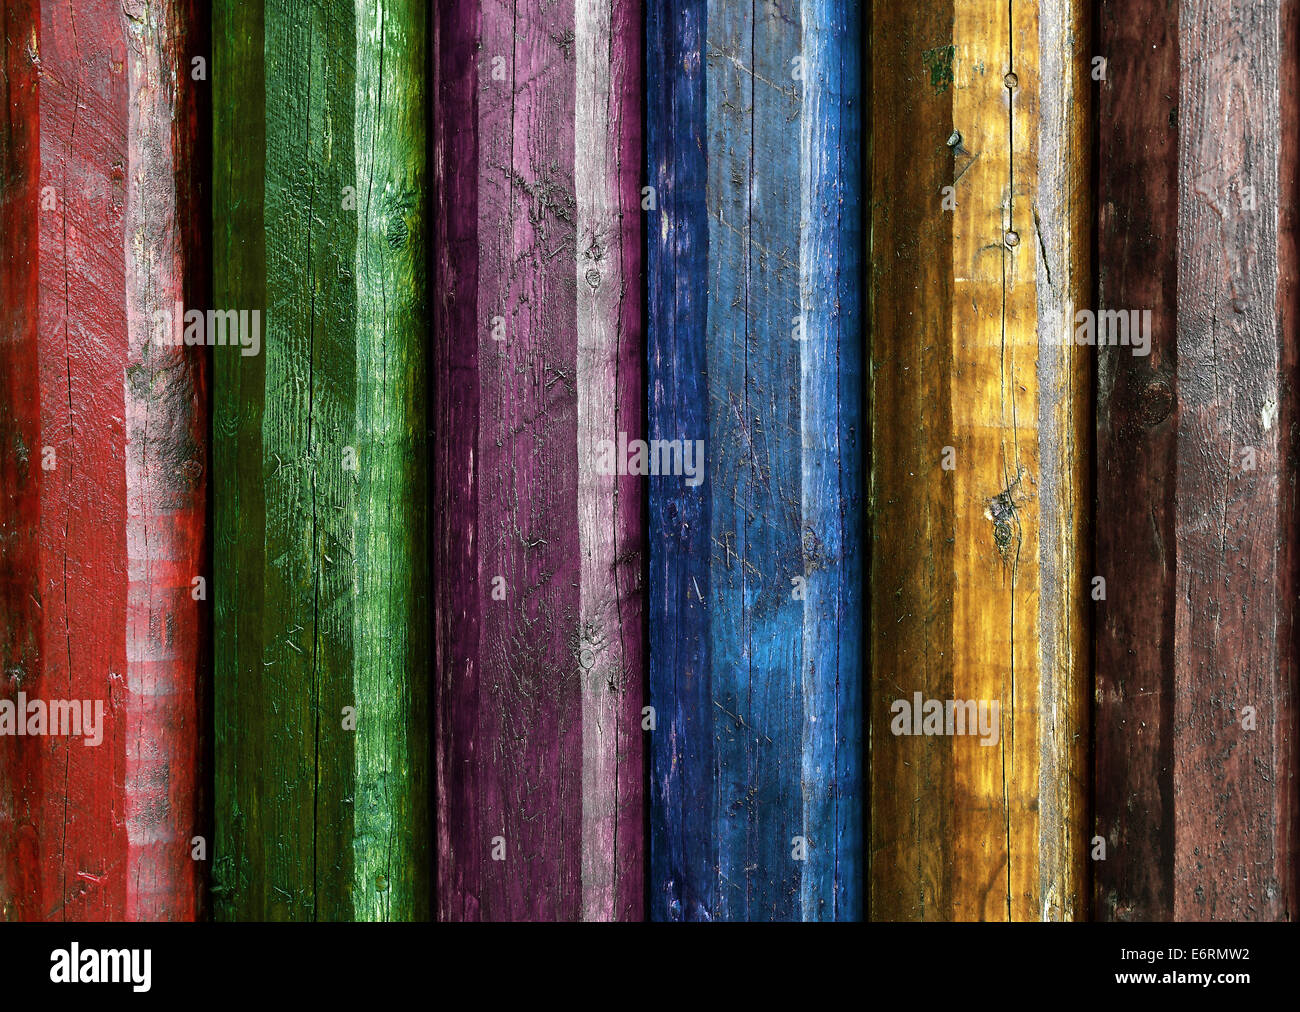 Wall of rough wooden poles painted in several colors Stock Photo